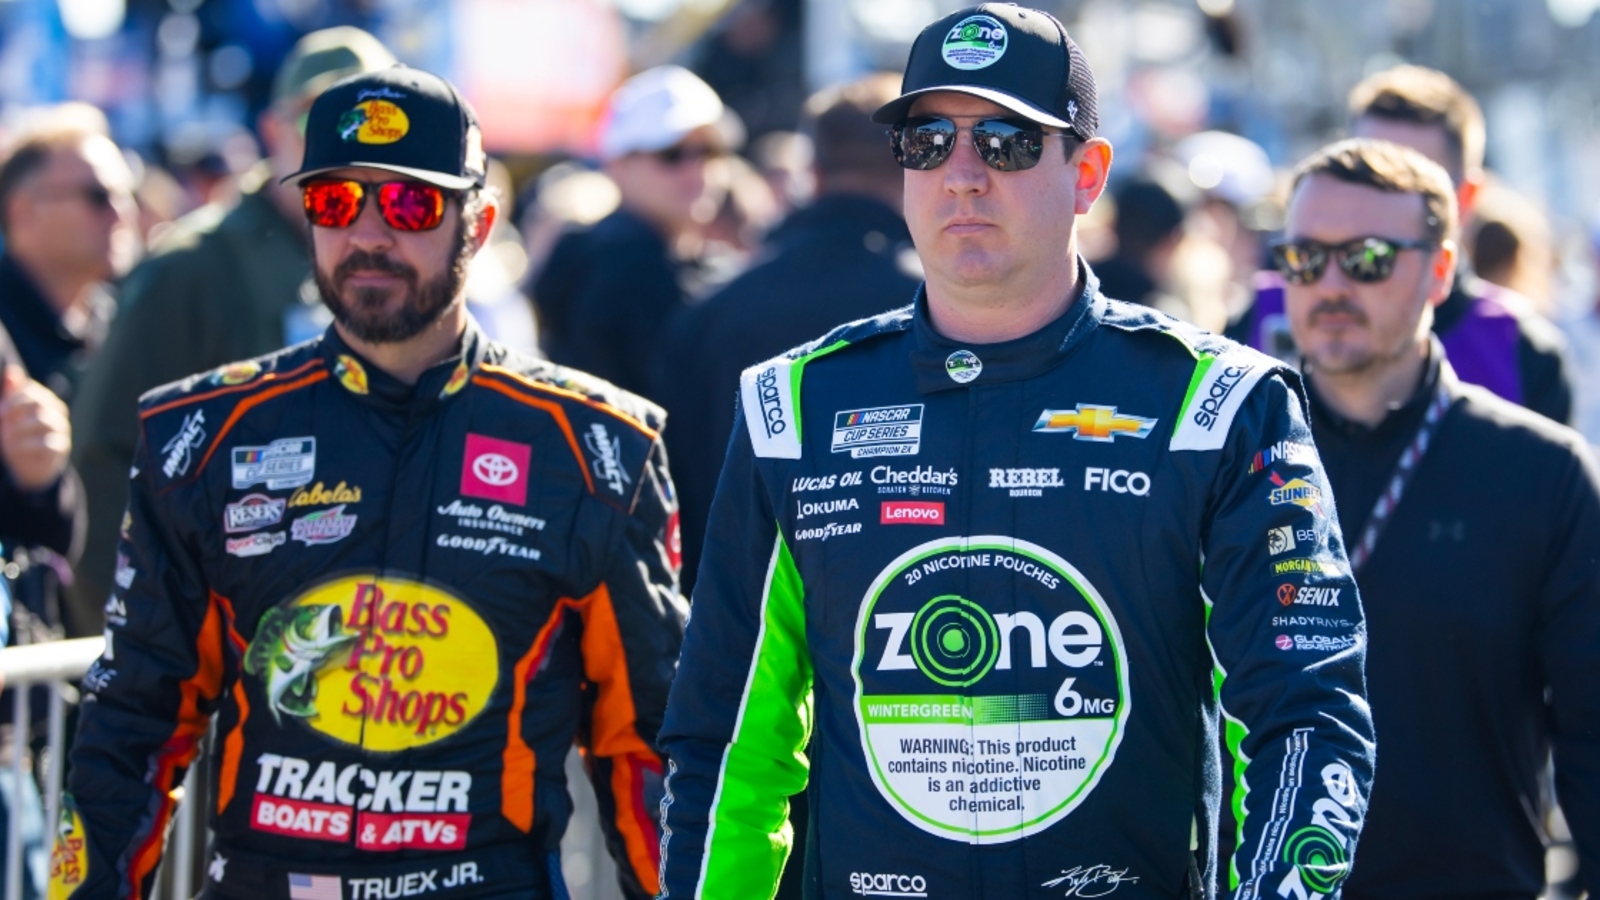 Kyle Busch dejected after wreck in practice: ‘Impossible’